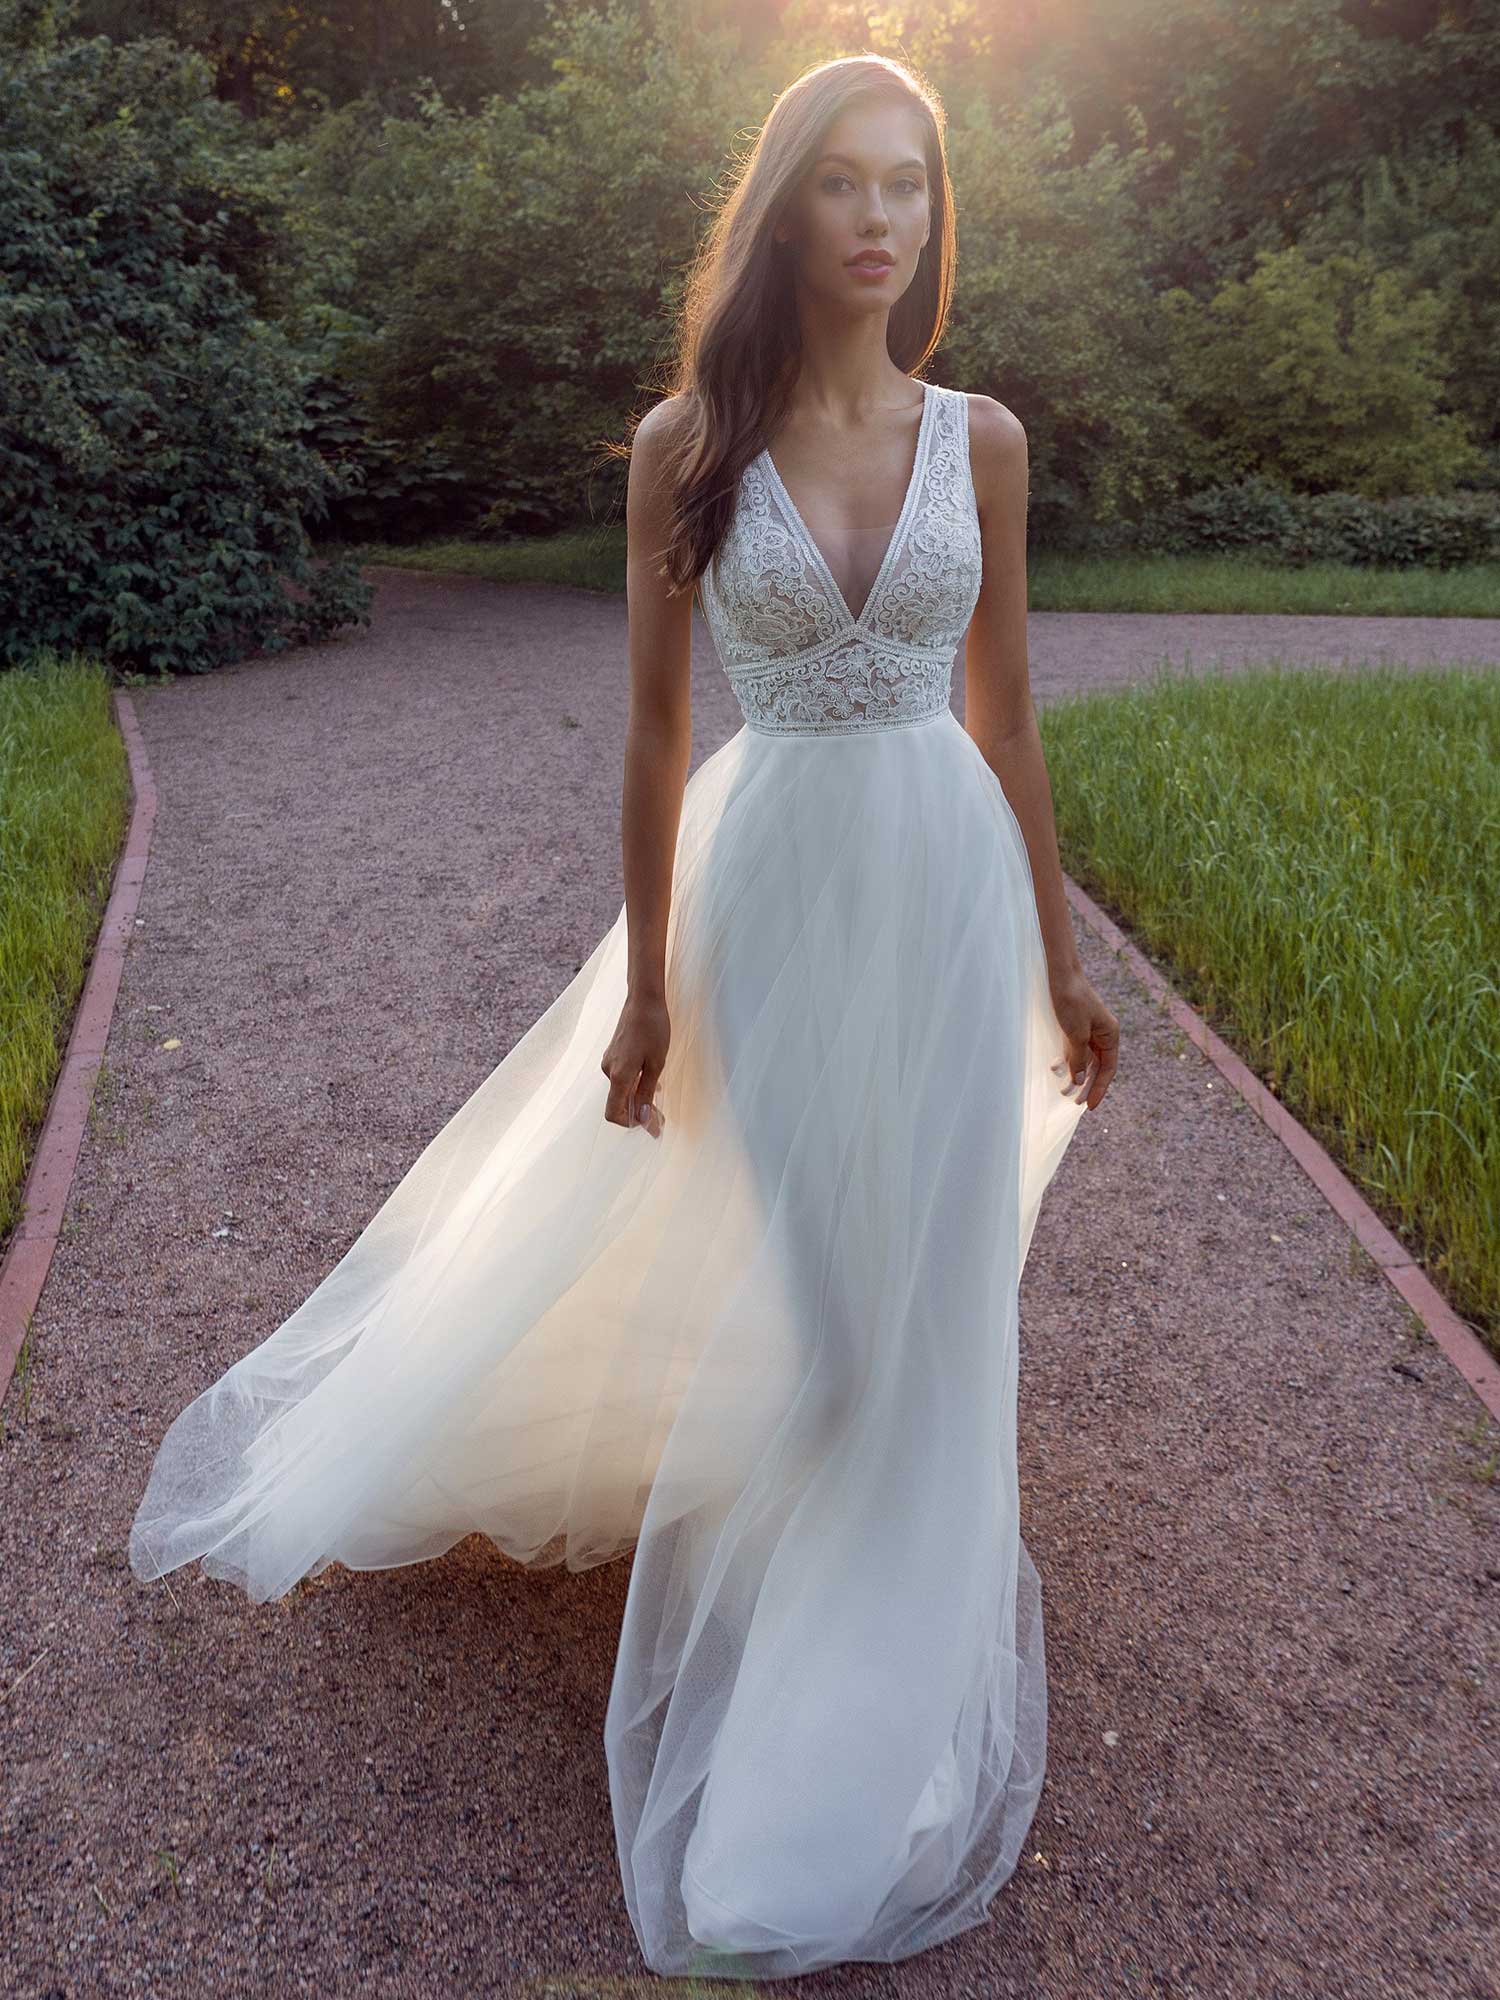 A-line-wedding-dress-with-deep-V-neckline-lace-bodice-and-illusion-back